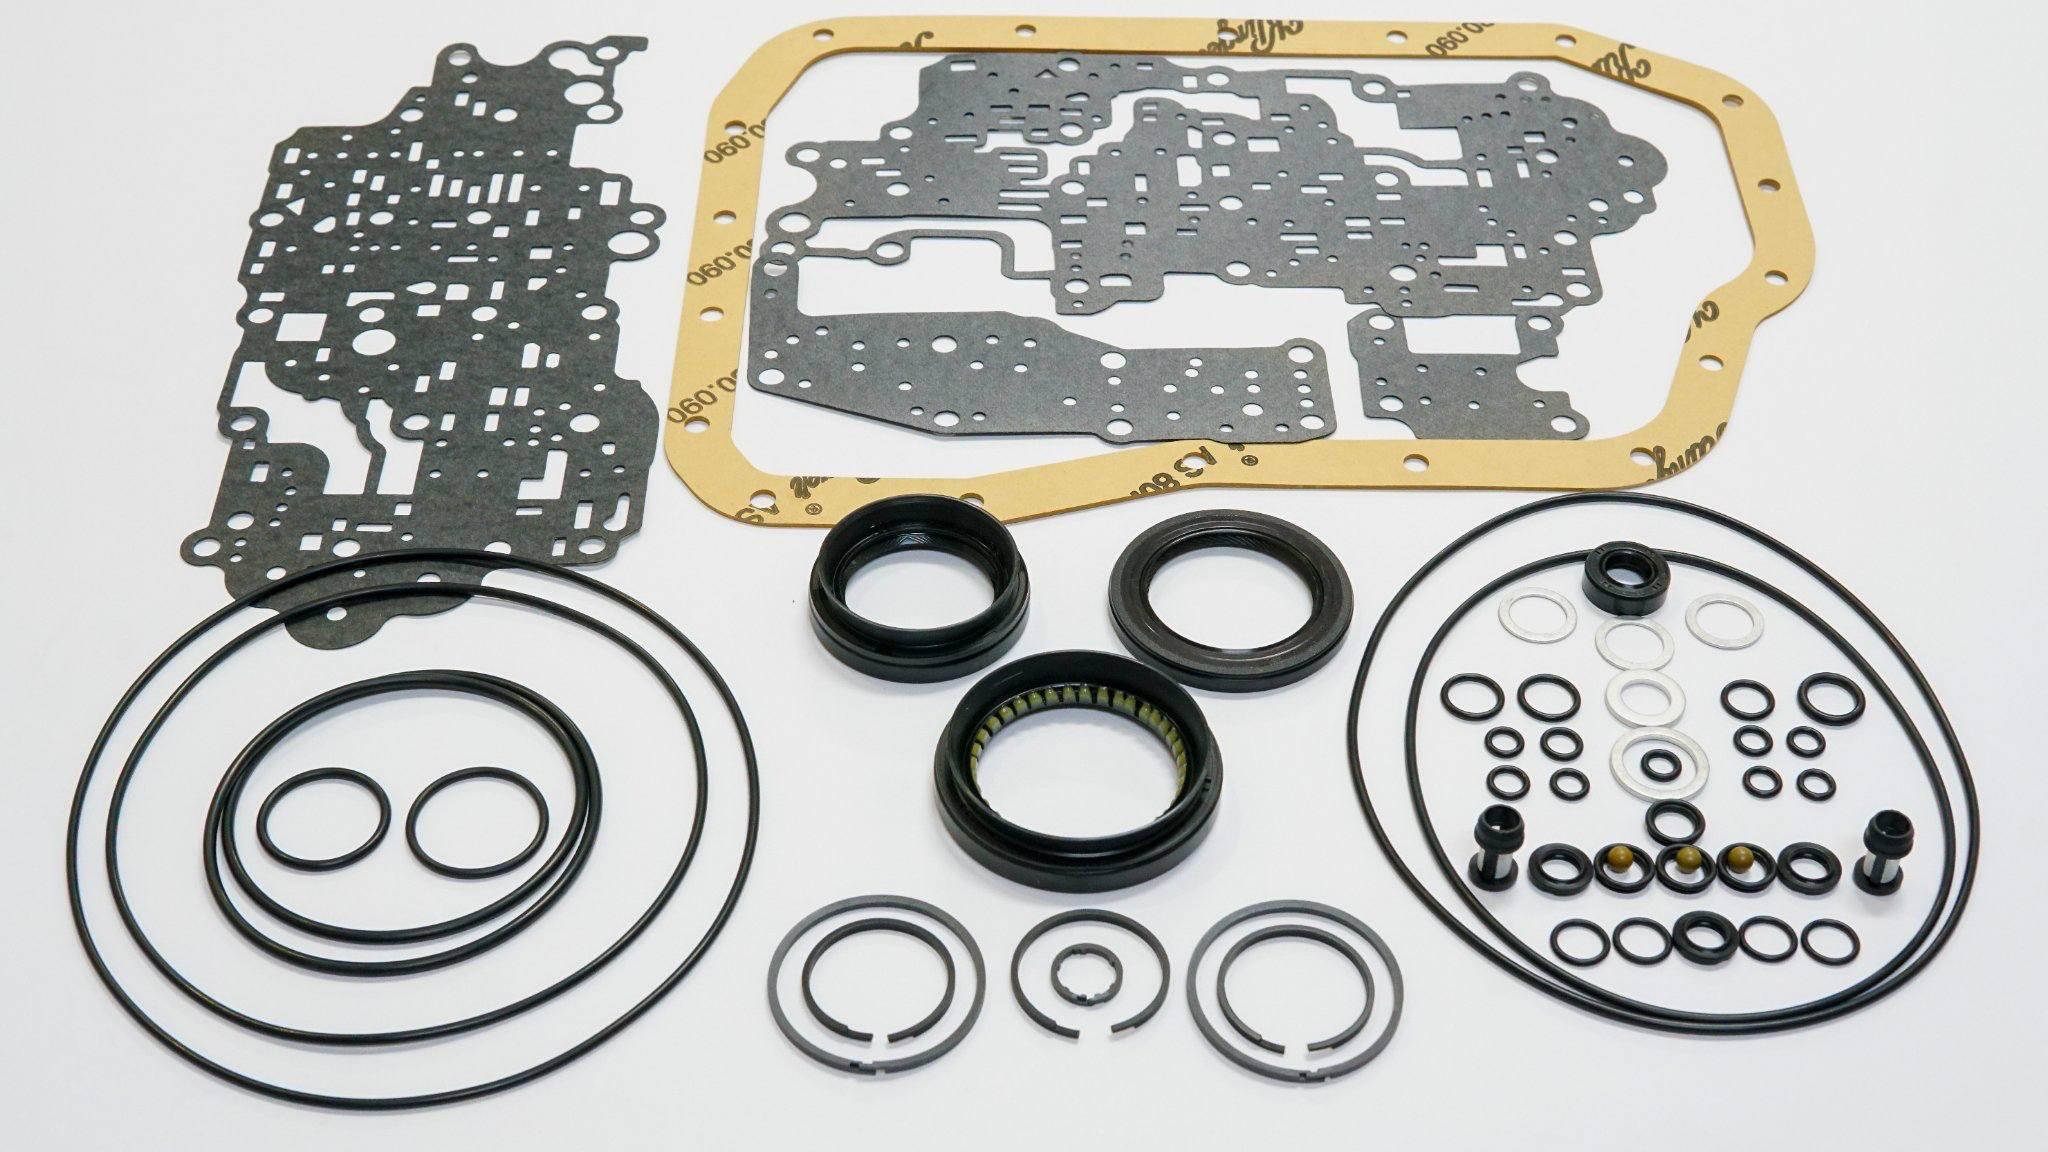 The Repair Kit for Automatic Transmission